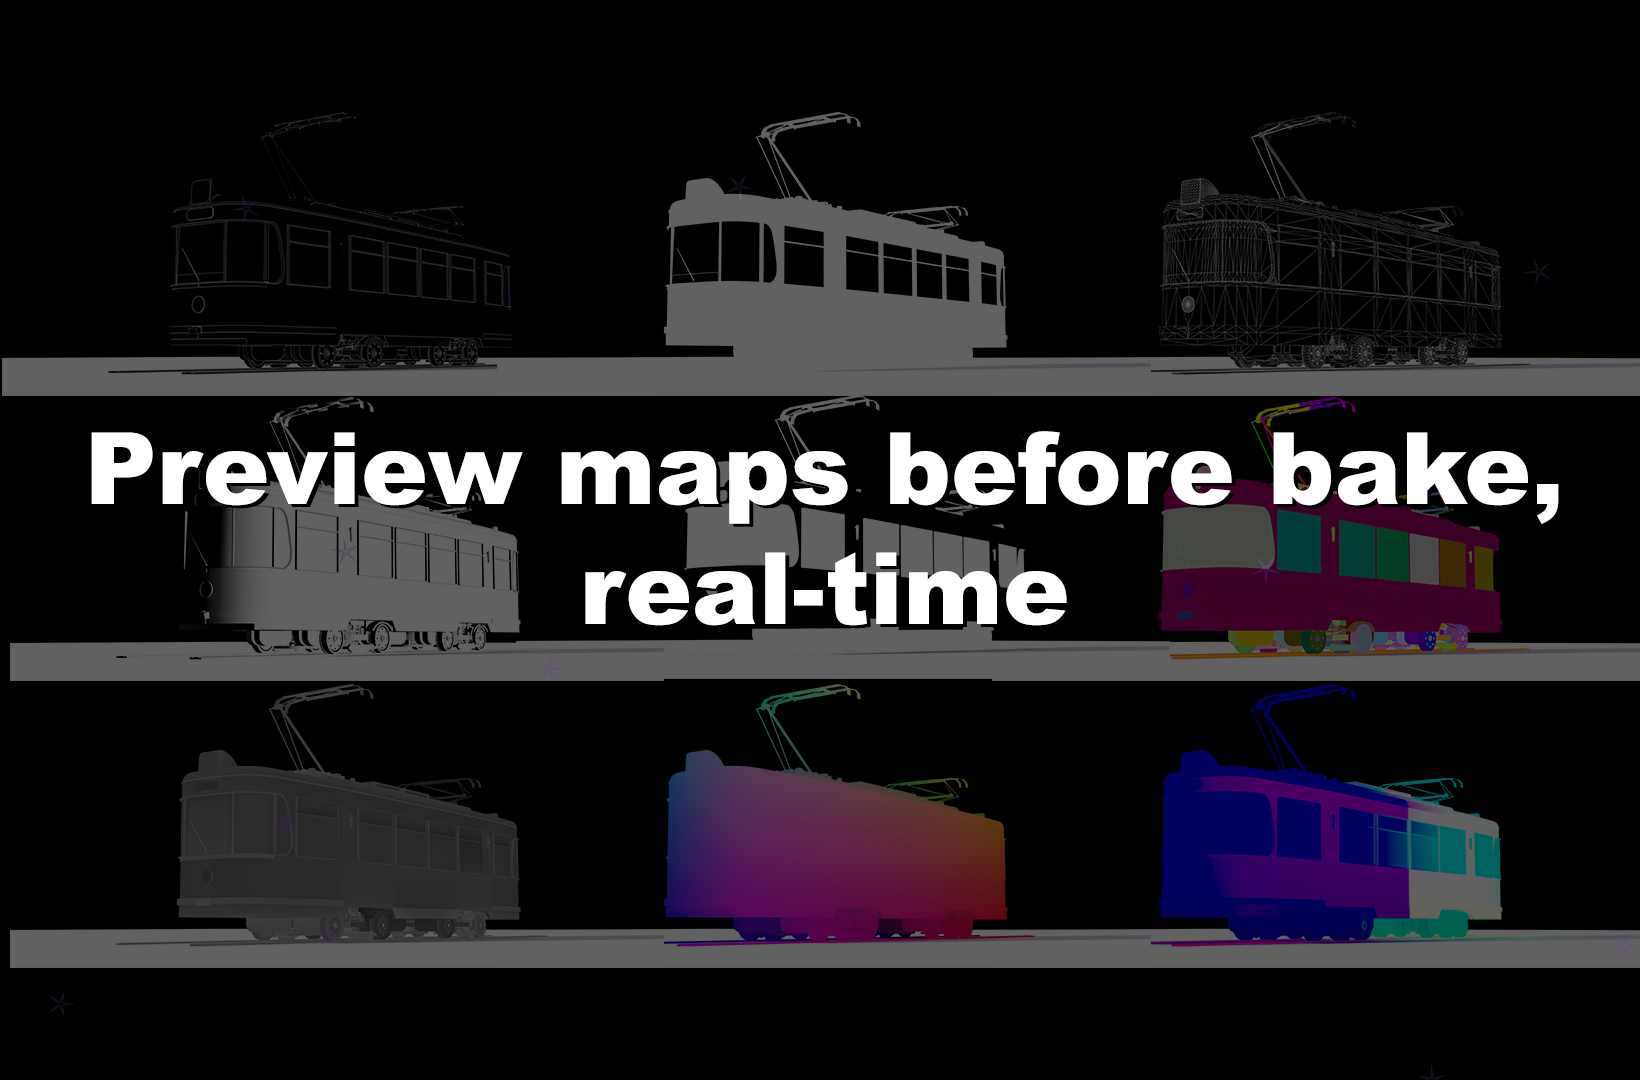 Preview maps before baking, real-time